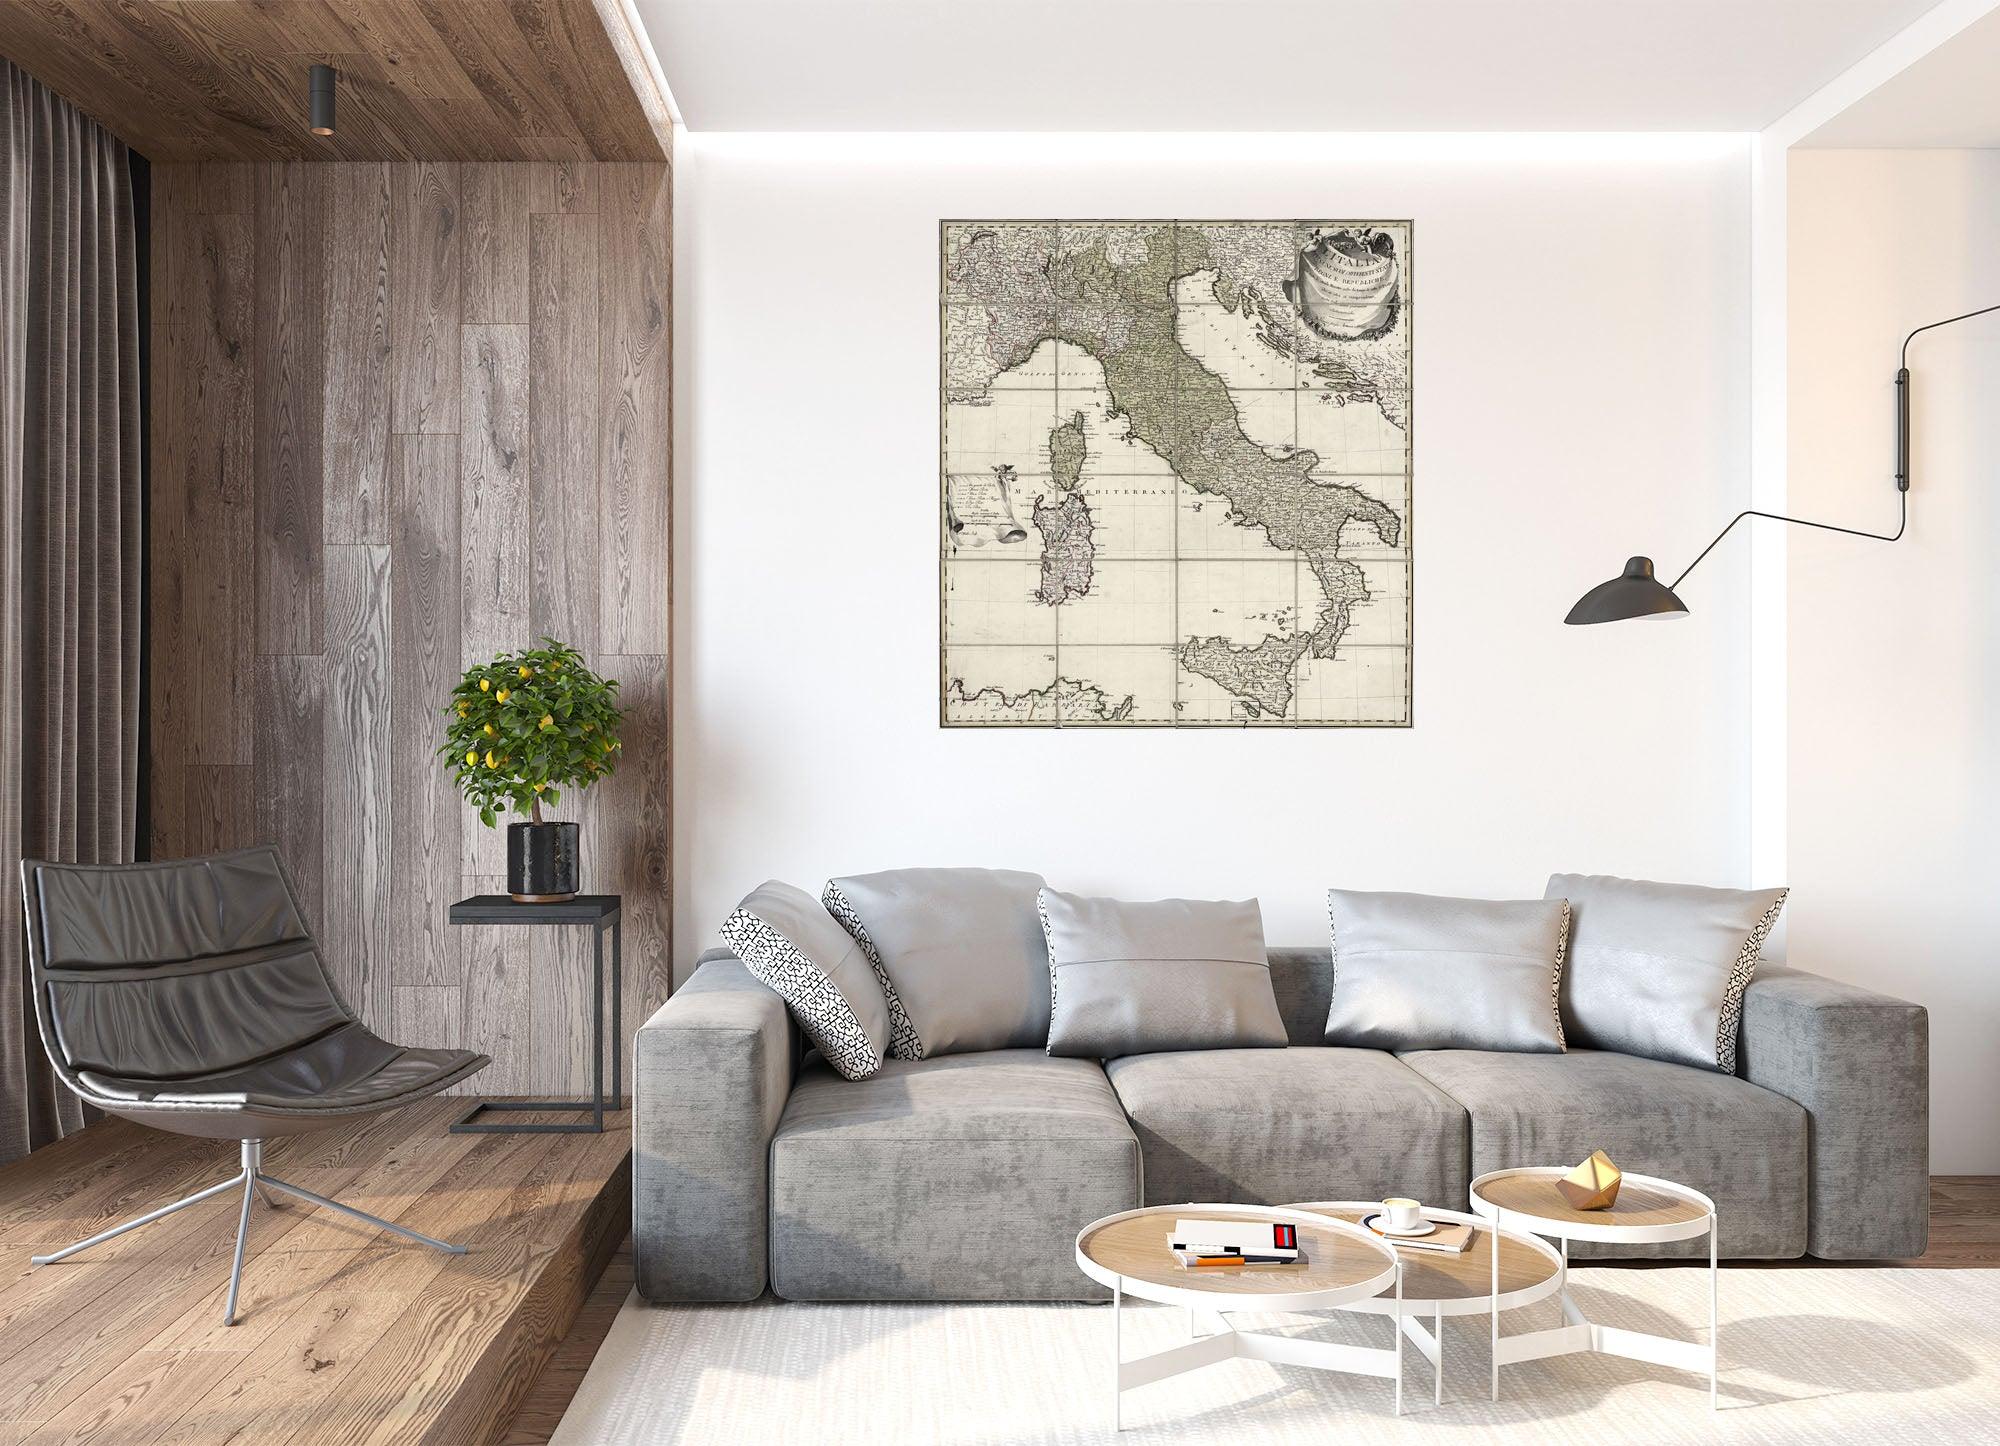 CoolWalls.ca diecut Map of Italy Made in 1795, Wall Decal Sticker Wallpaper, PEEL-N-STICK, removable anytime. Great for a classroom